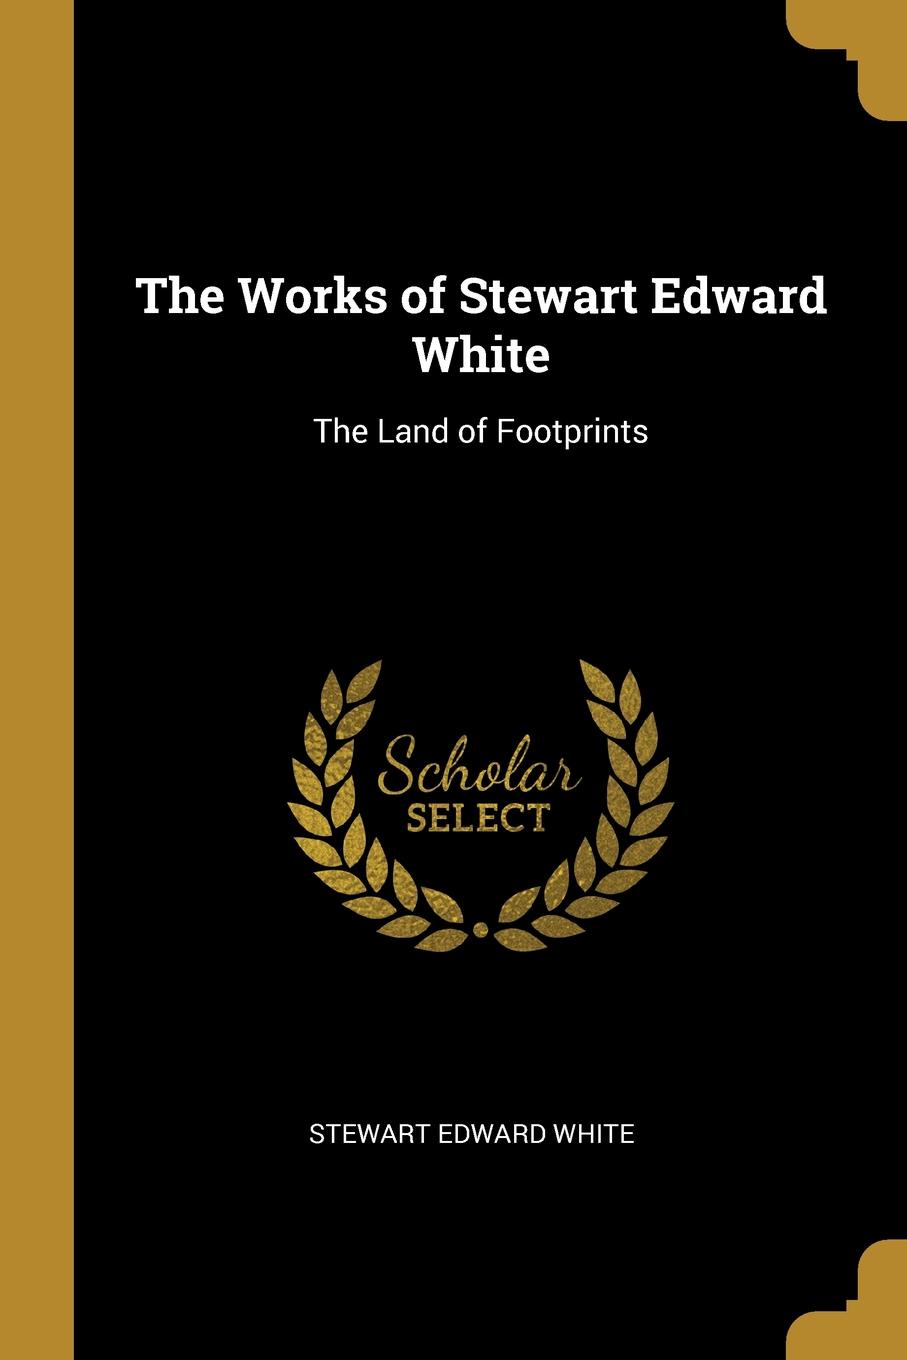 The Works of Stewart Edward White. The Land of Footprints